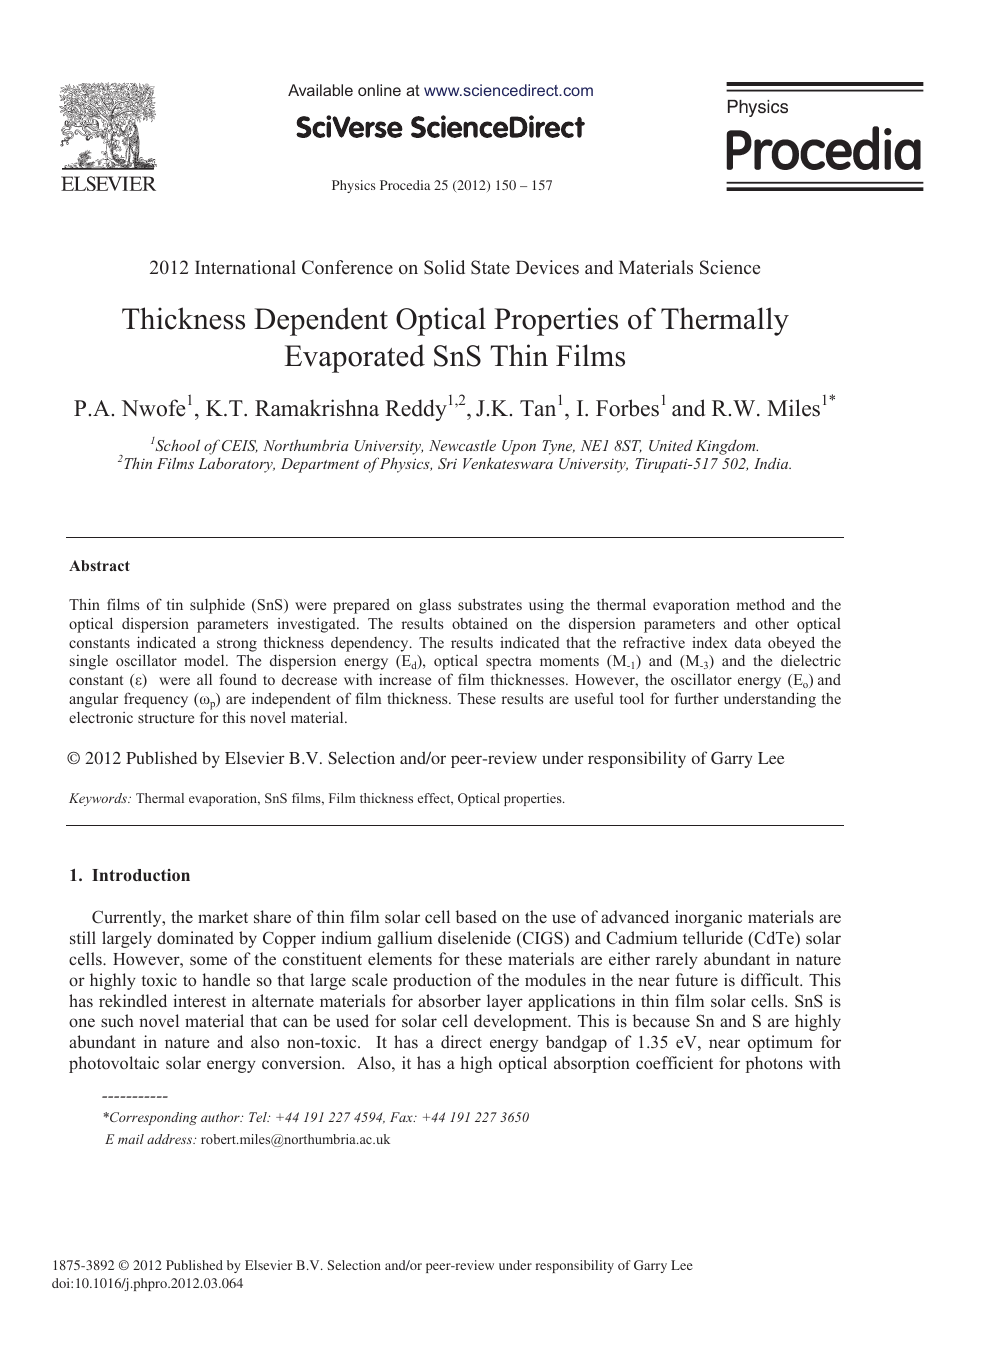 Thickness Dependent Optical Properties Of Thermally Evaporated Sns Thin Films Topic Of Research Paper In Materials Engineering Download Scholarly Article Pdf And Read For Free On Cyberleninka Open Science Hub